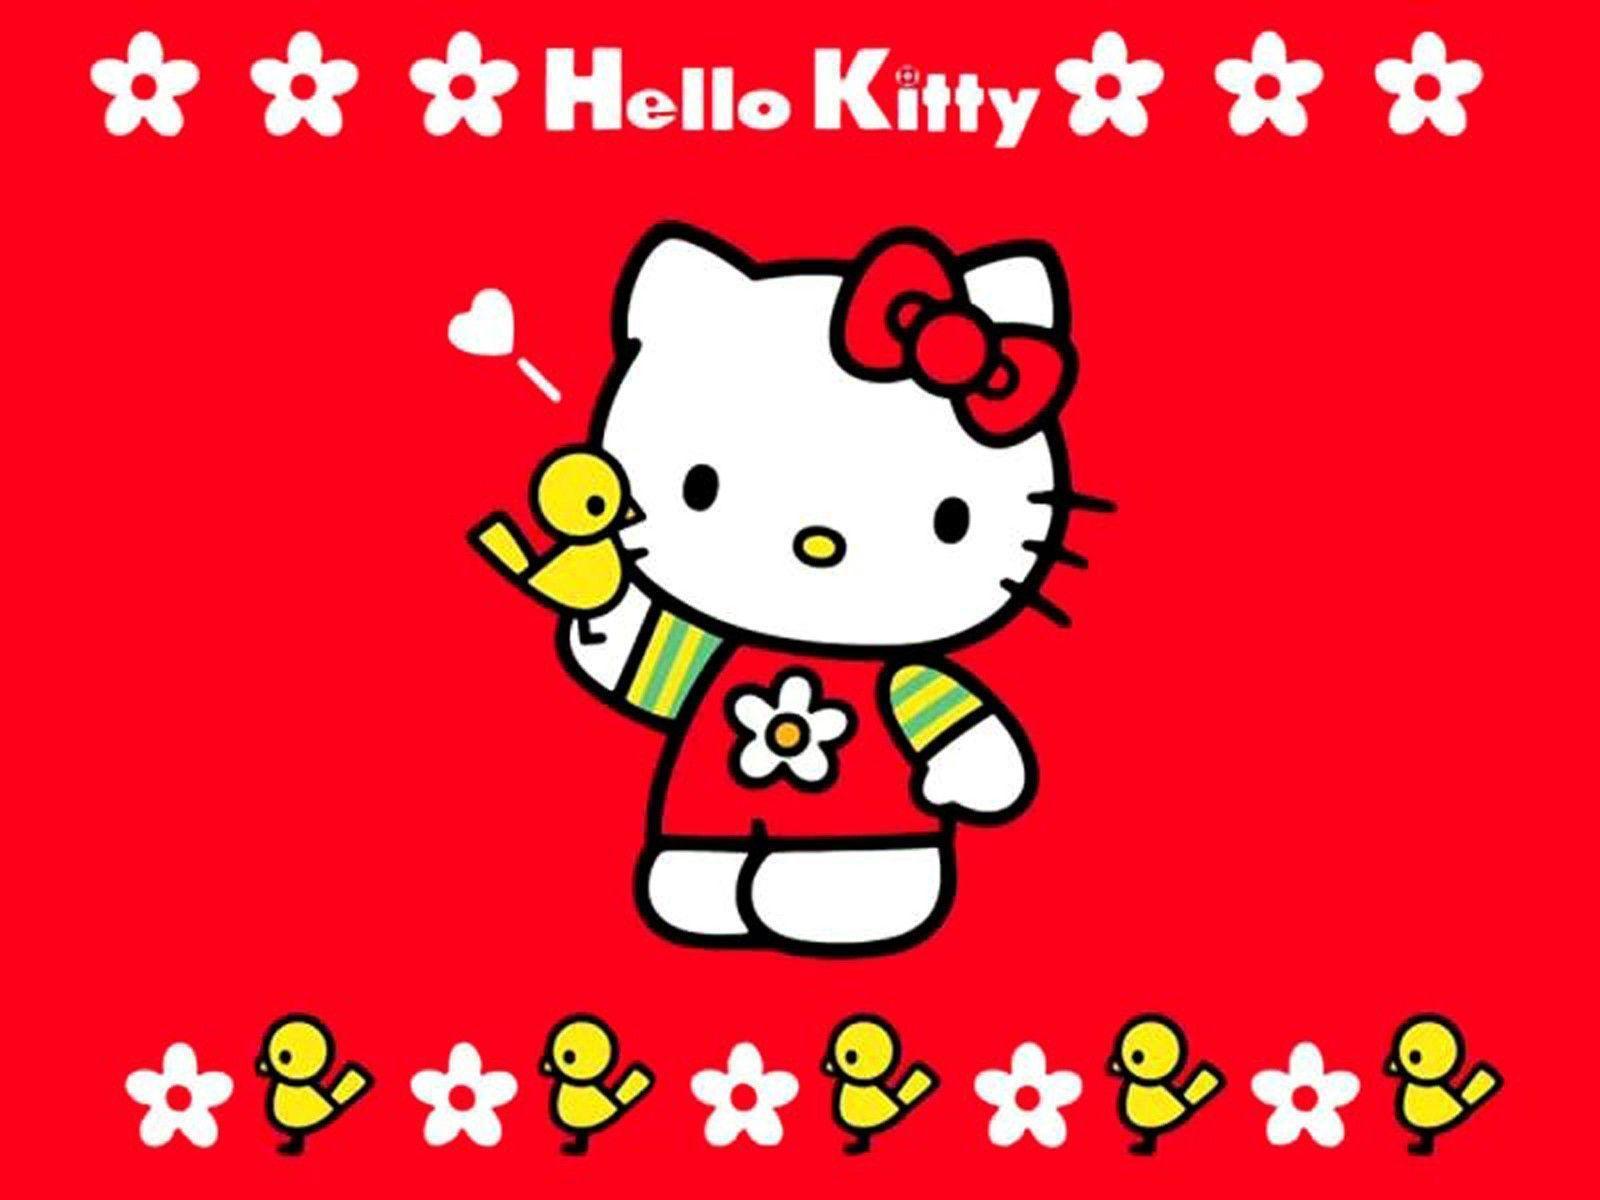 HD Wallpapers Hello Kitty - Wallpaper Cave